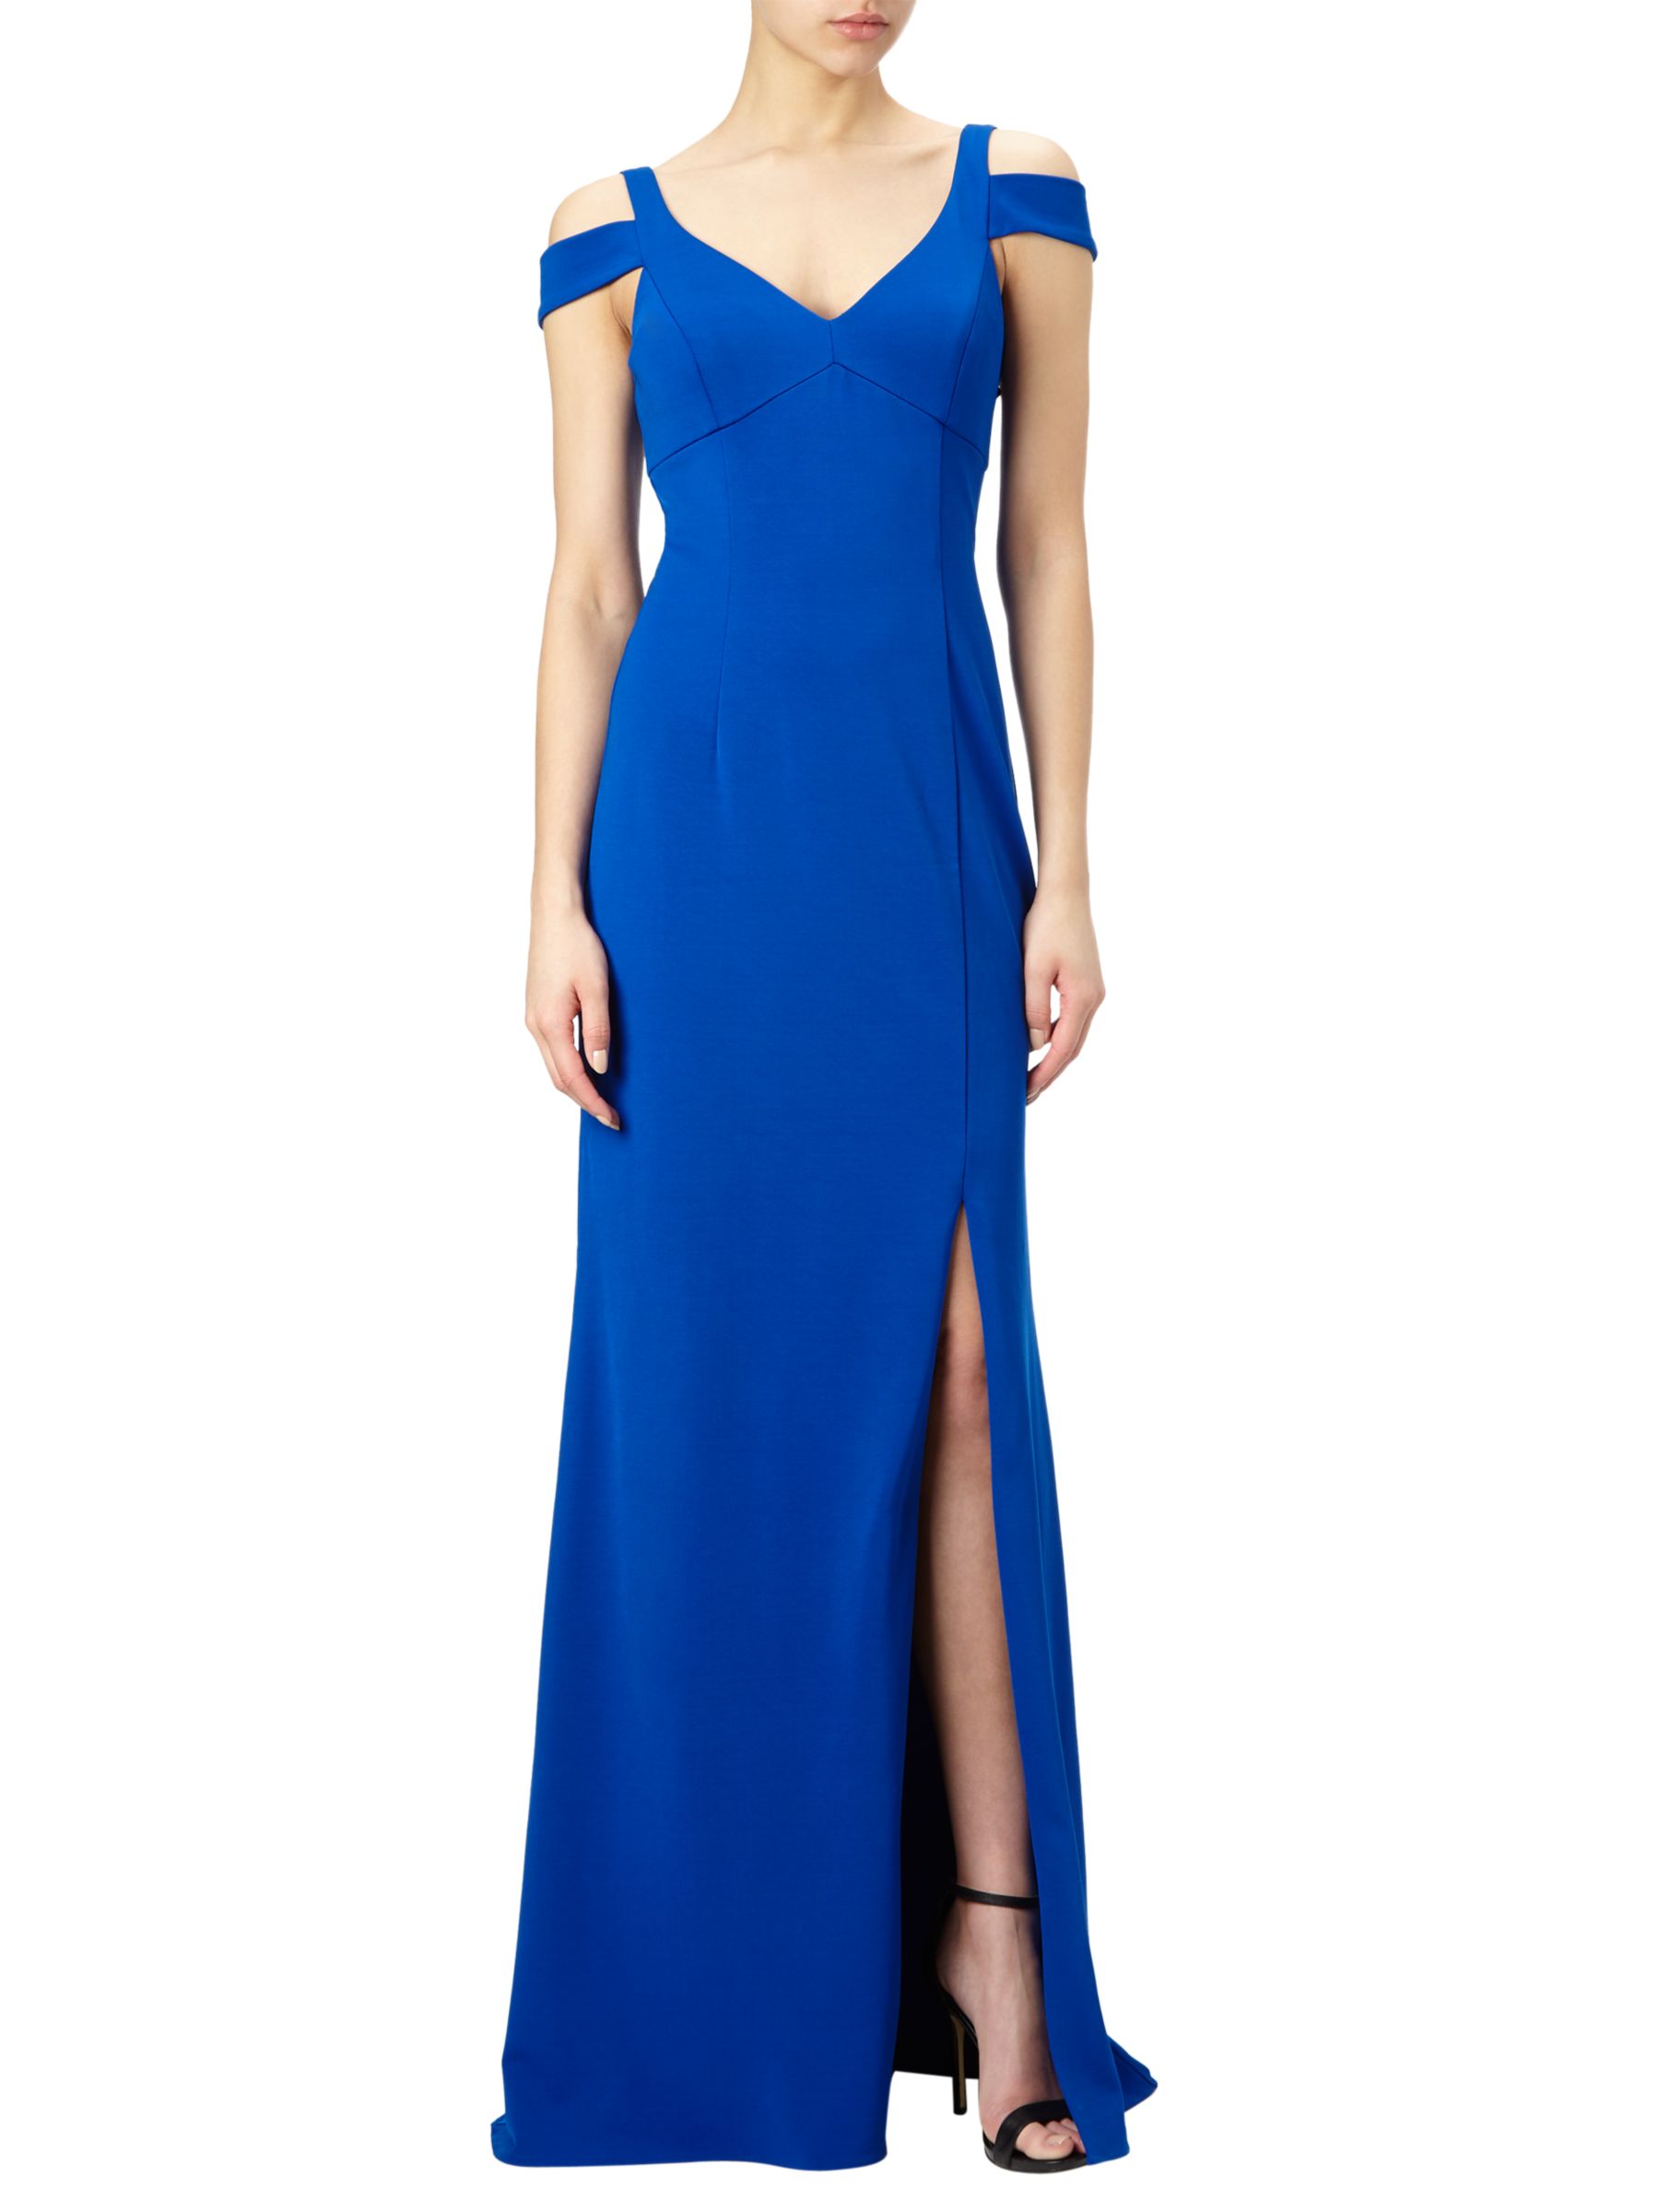 Adrianna Papell Modified Jersey Mermaid Gown, Royal Blue